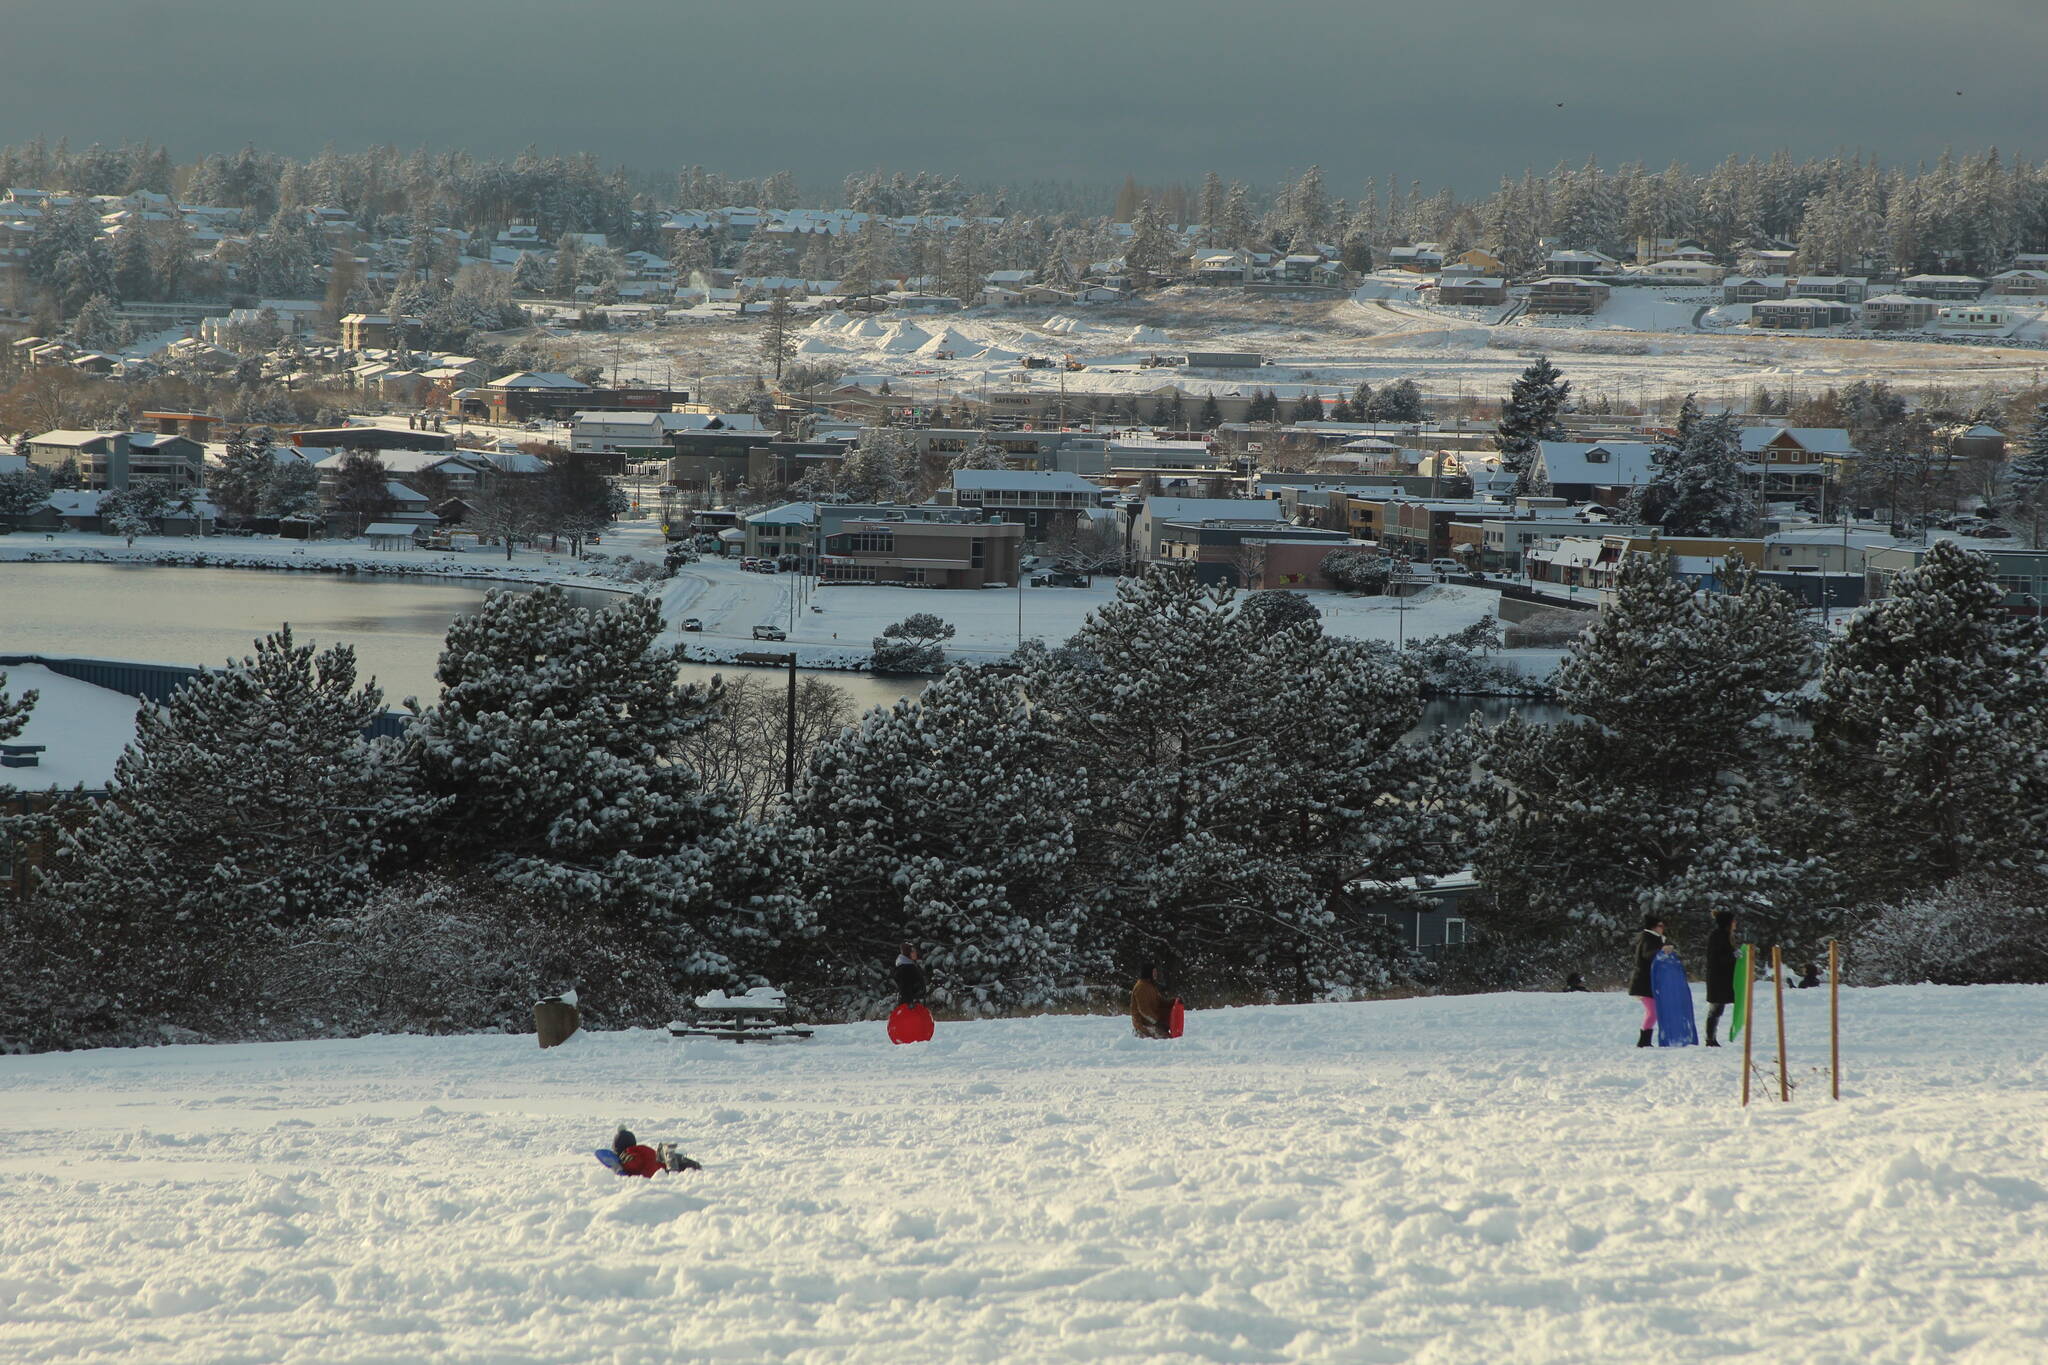 Oak Harbor residents take advantage of the first snowfall of winter by sledding on a hill overlooking the city Tuesday afternoon. (Photo by Karina Andrew/Whidbey News-Times)